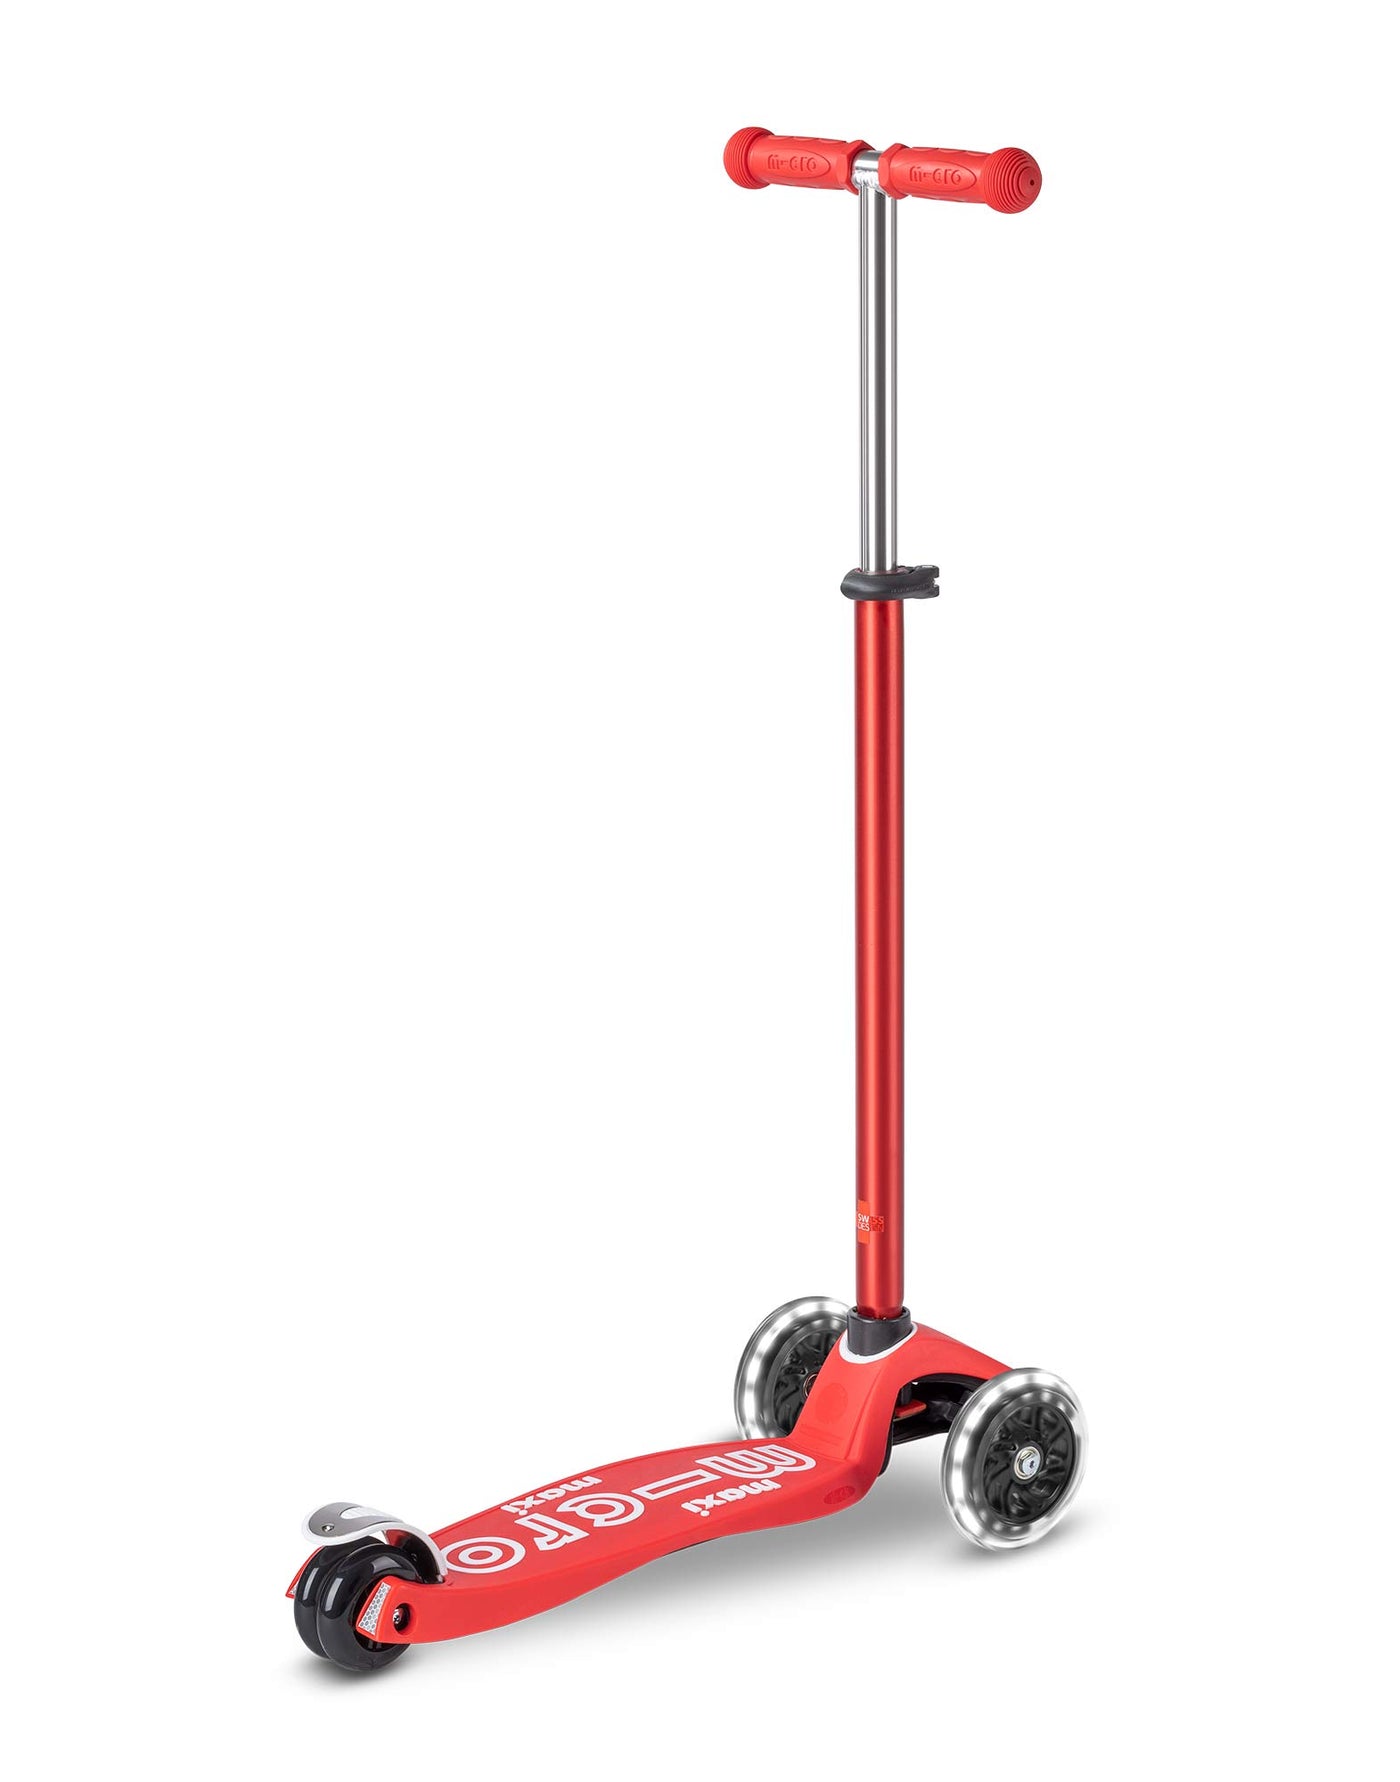 red maxi deluxe led 3 wheel scooter rear